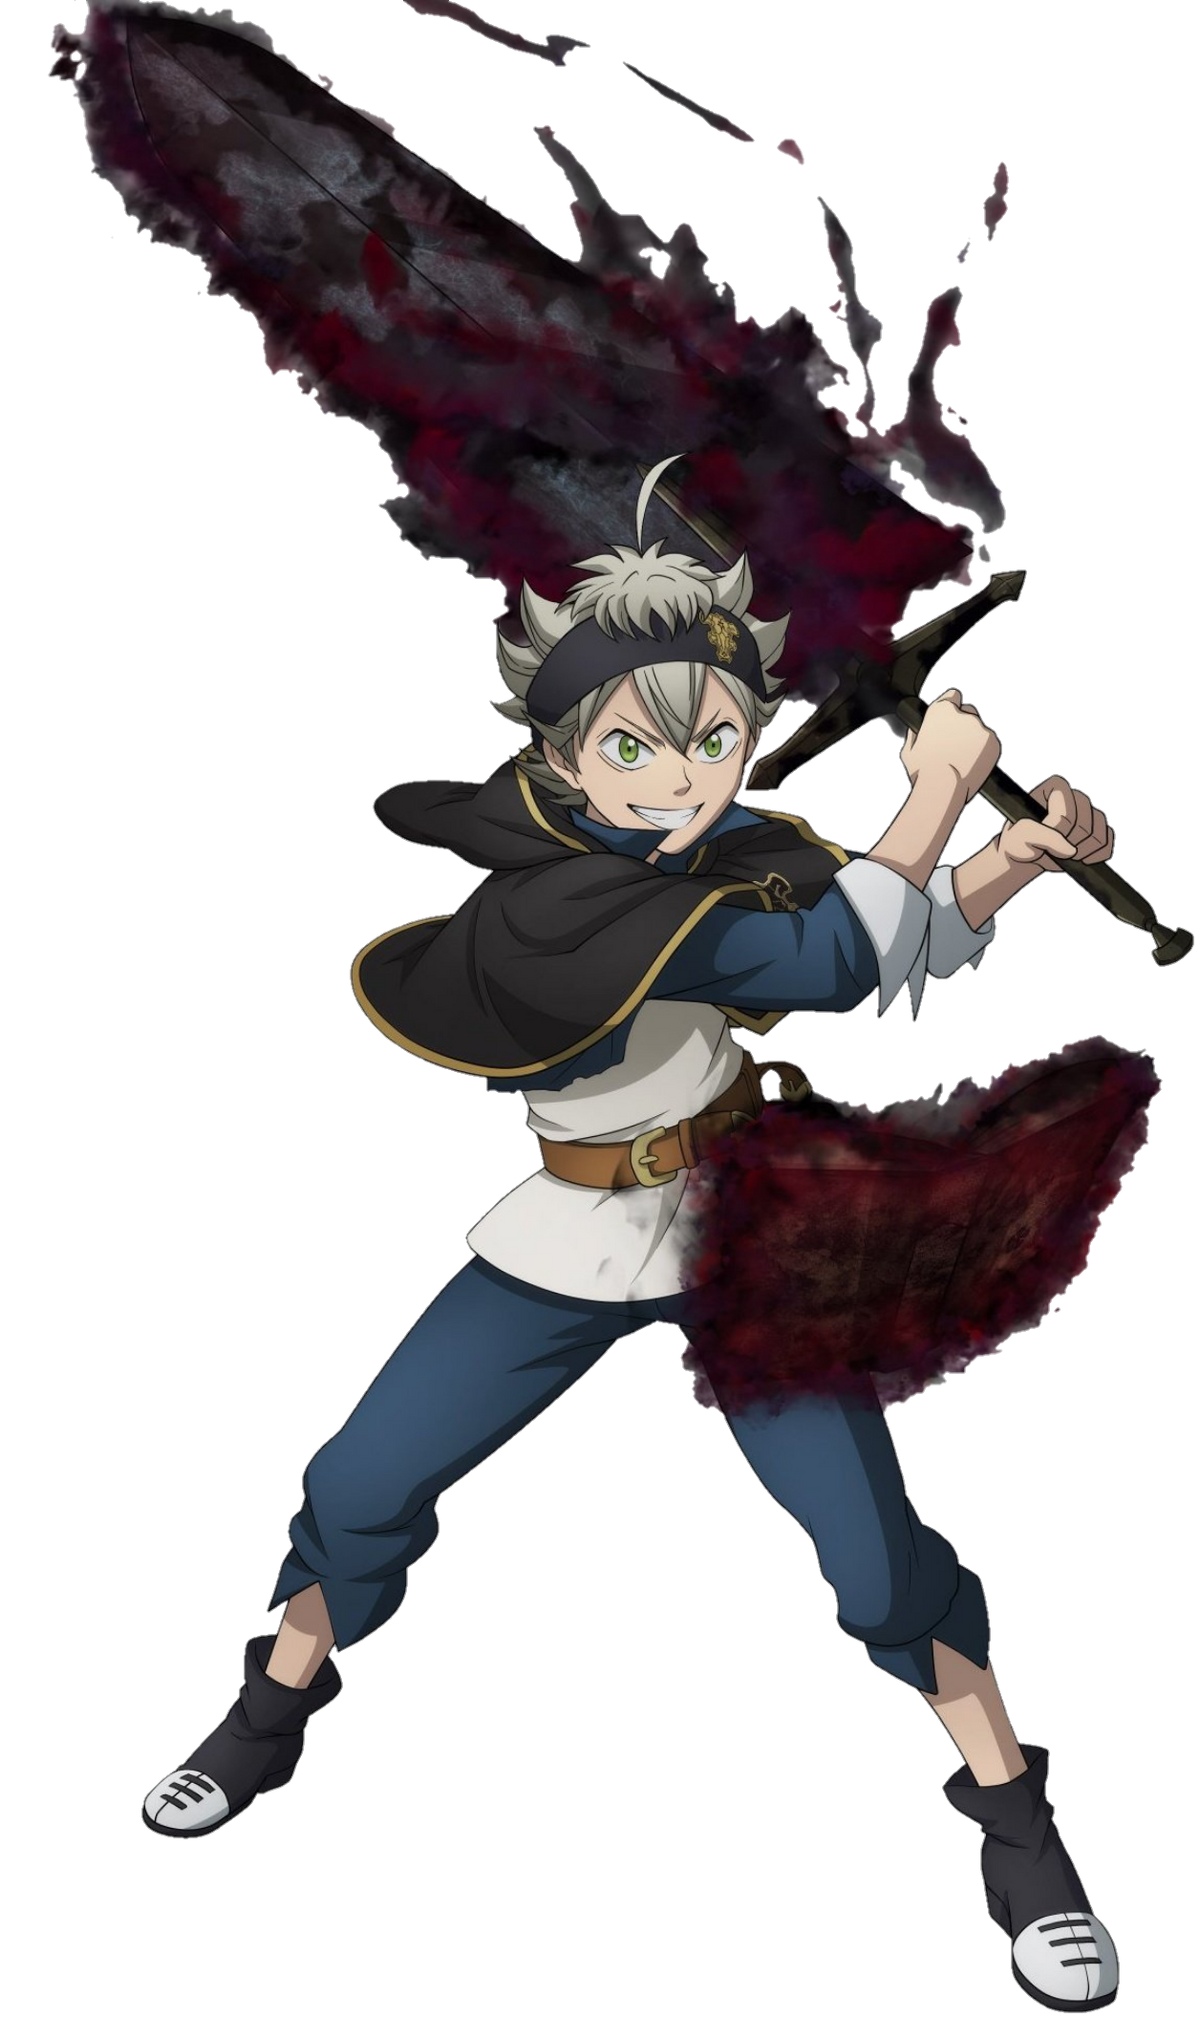 Made this Asta wallpaper for the final black clover episode